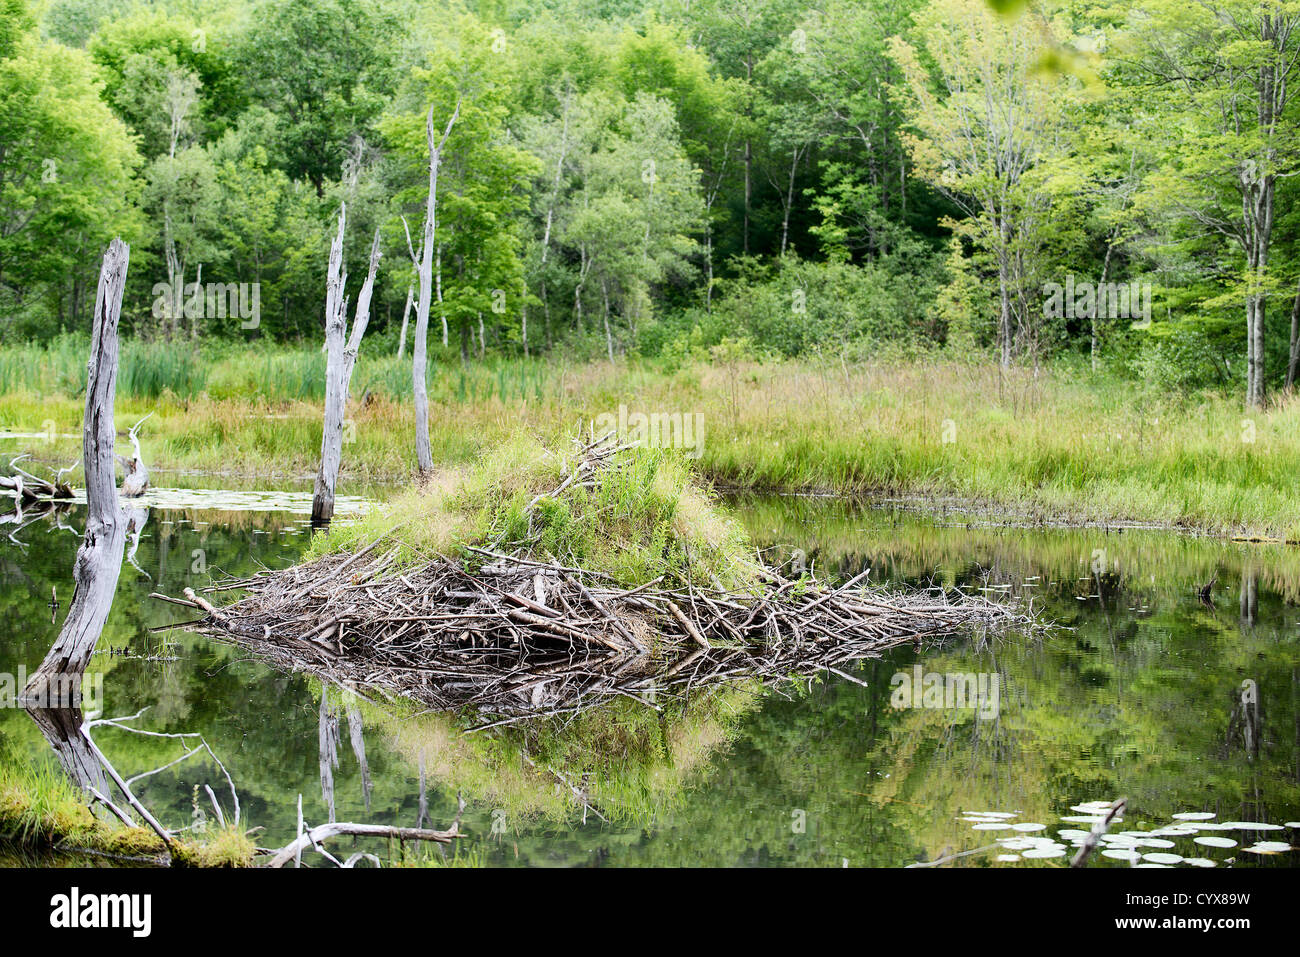 Beaver House located in Acadia National Park, Maine. Stock Photo